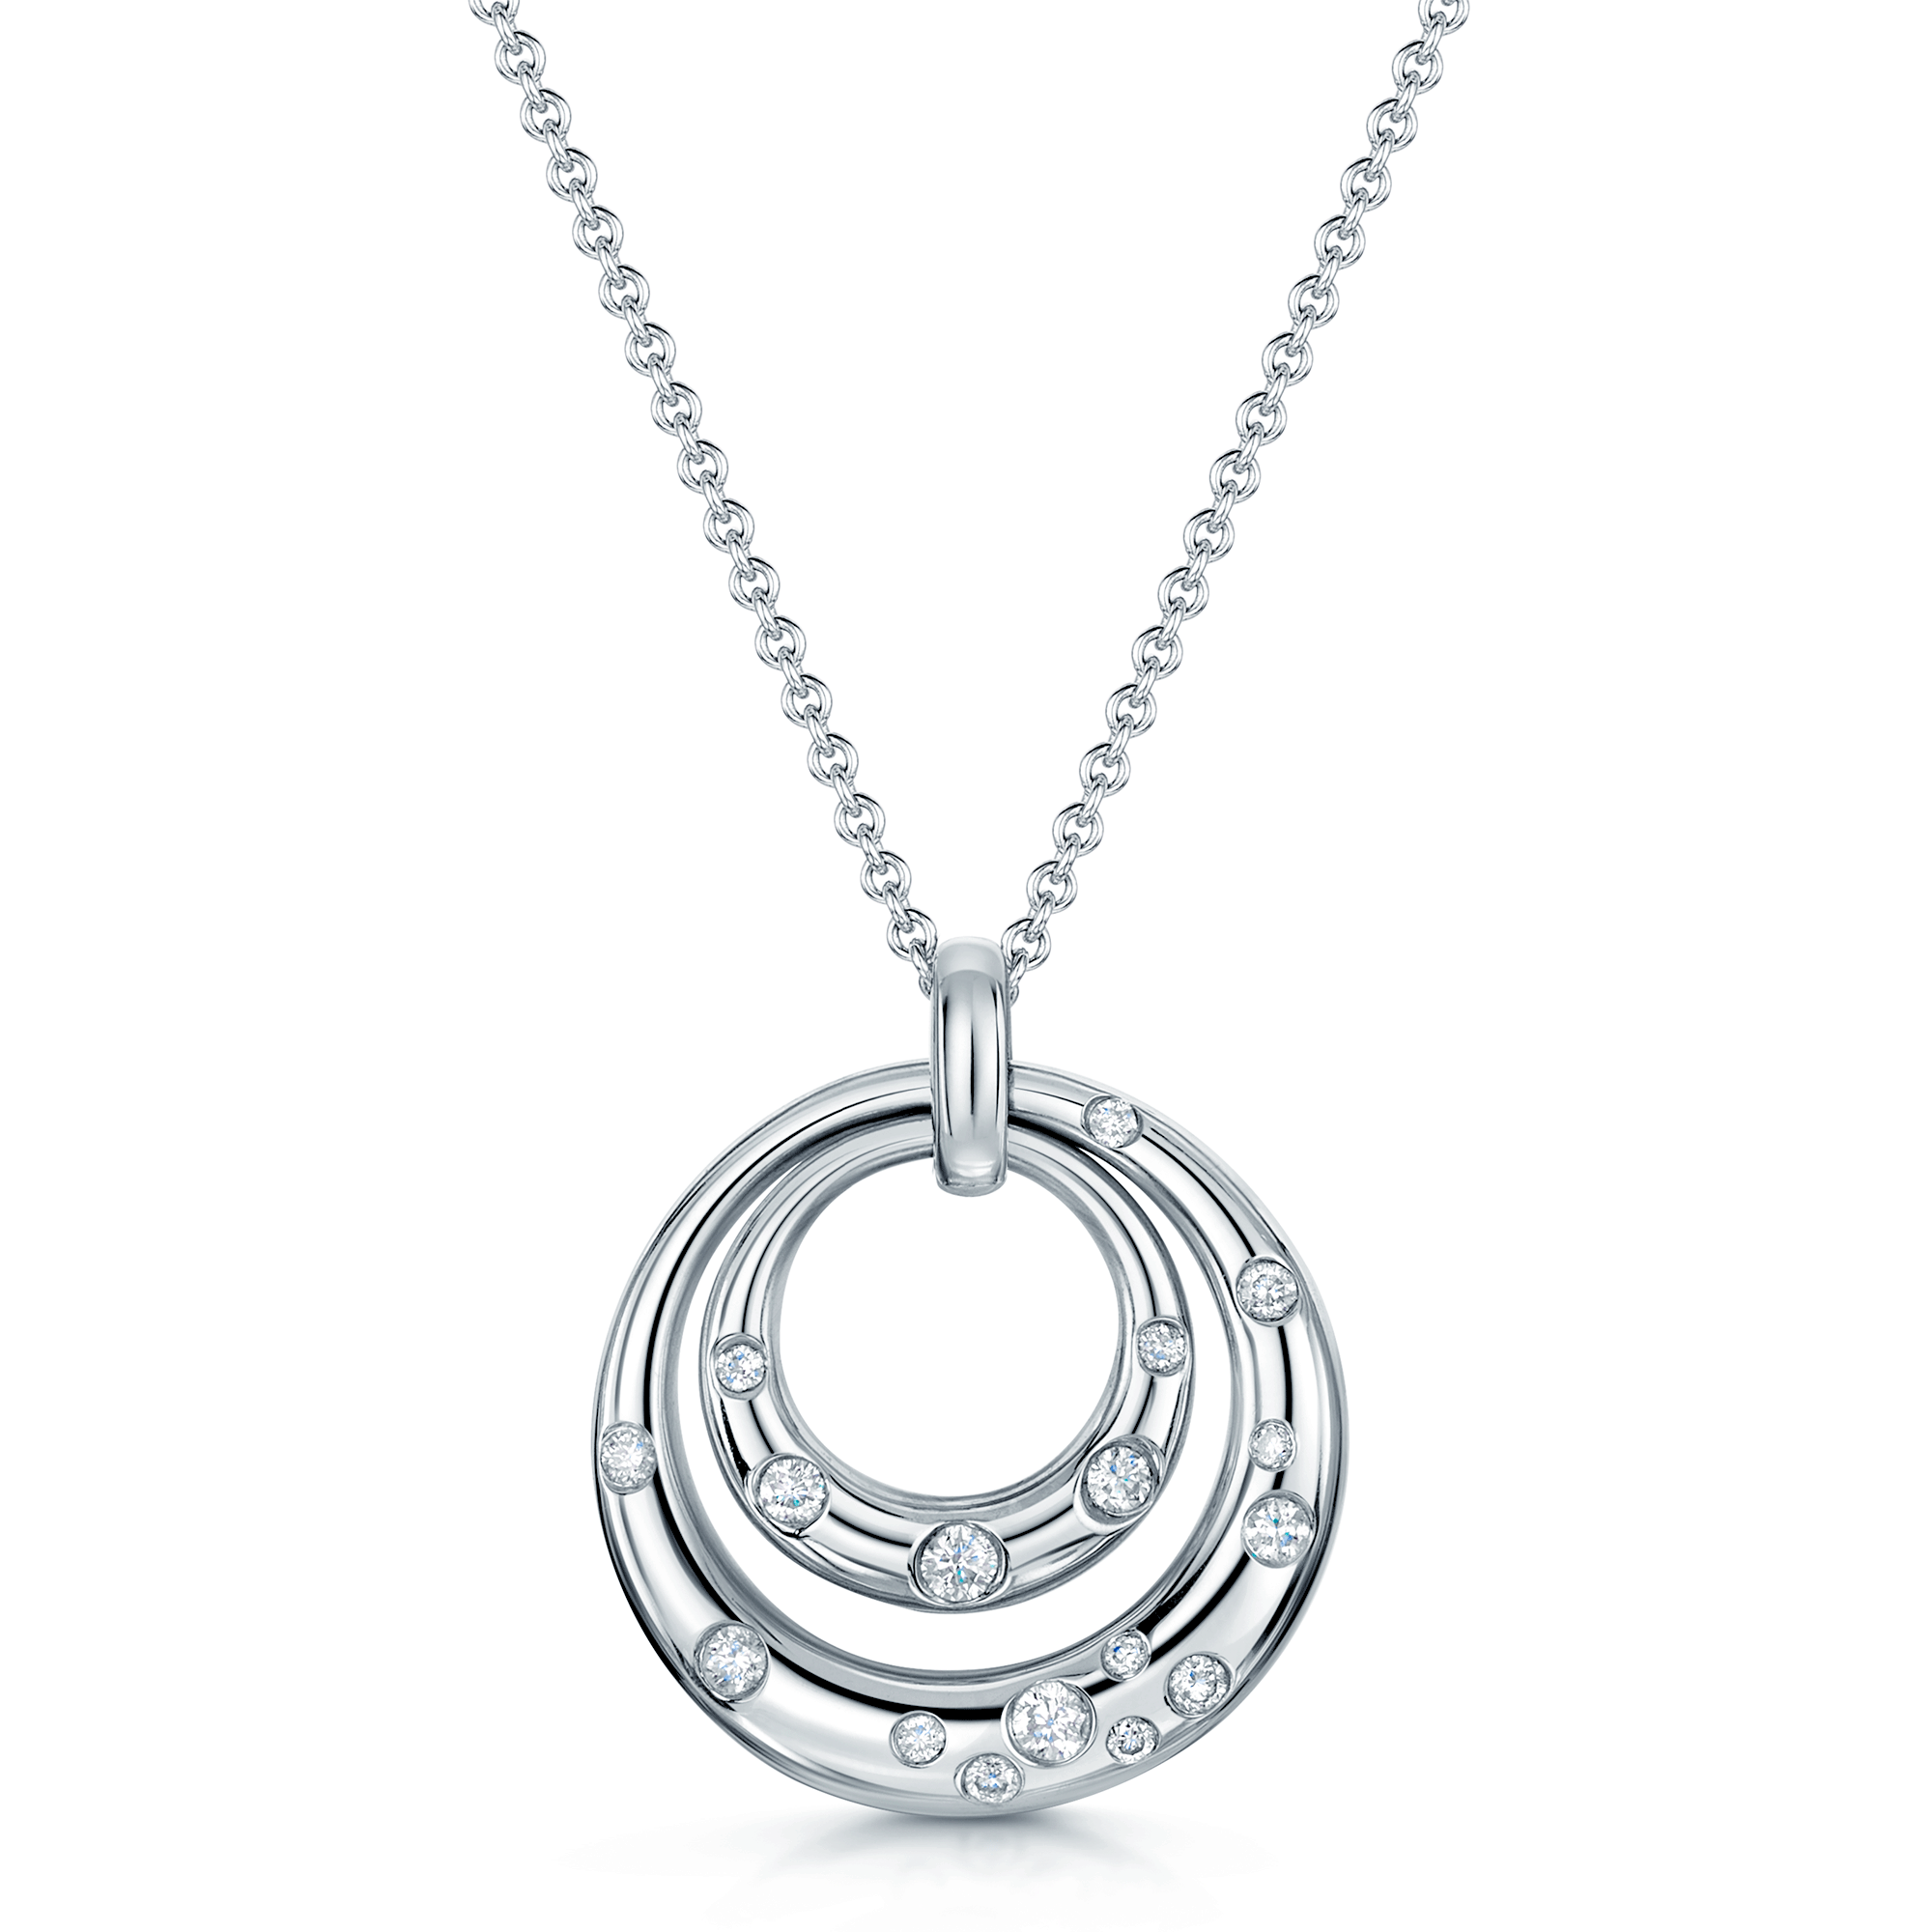 18ct White Gold Double Circle Drop Pendant With Scattered Diamonds